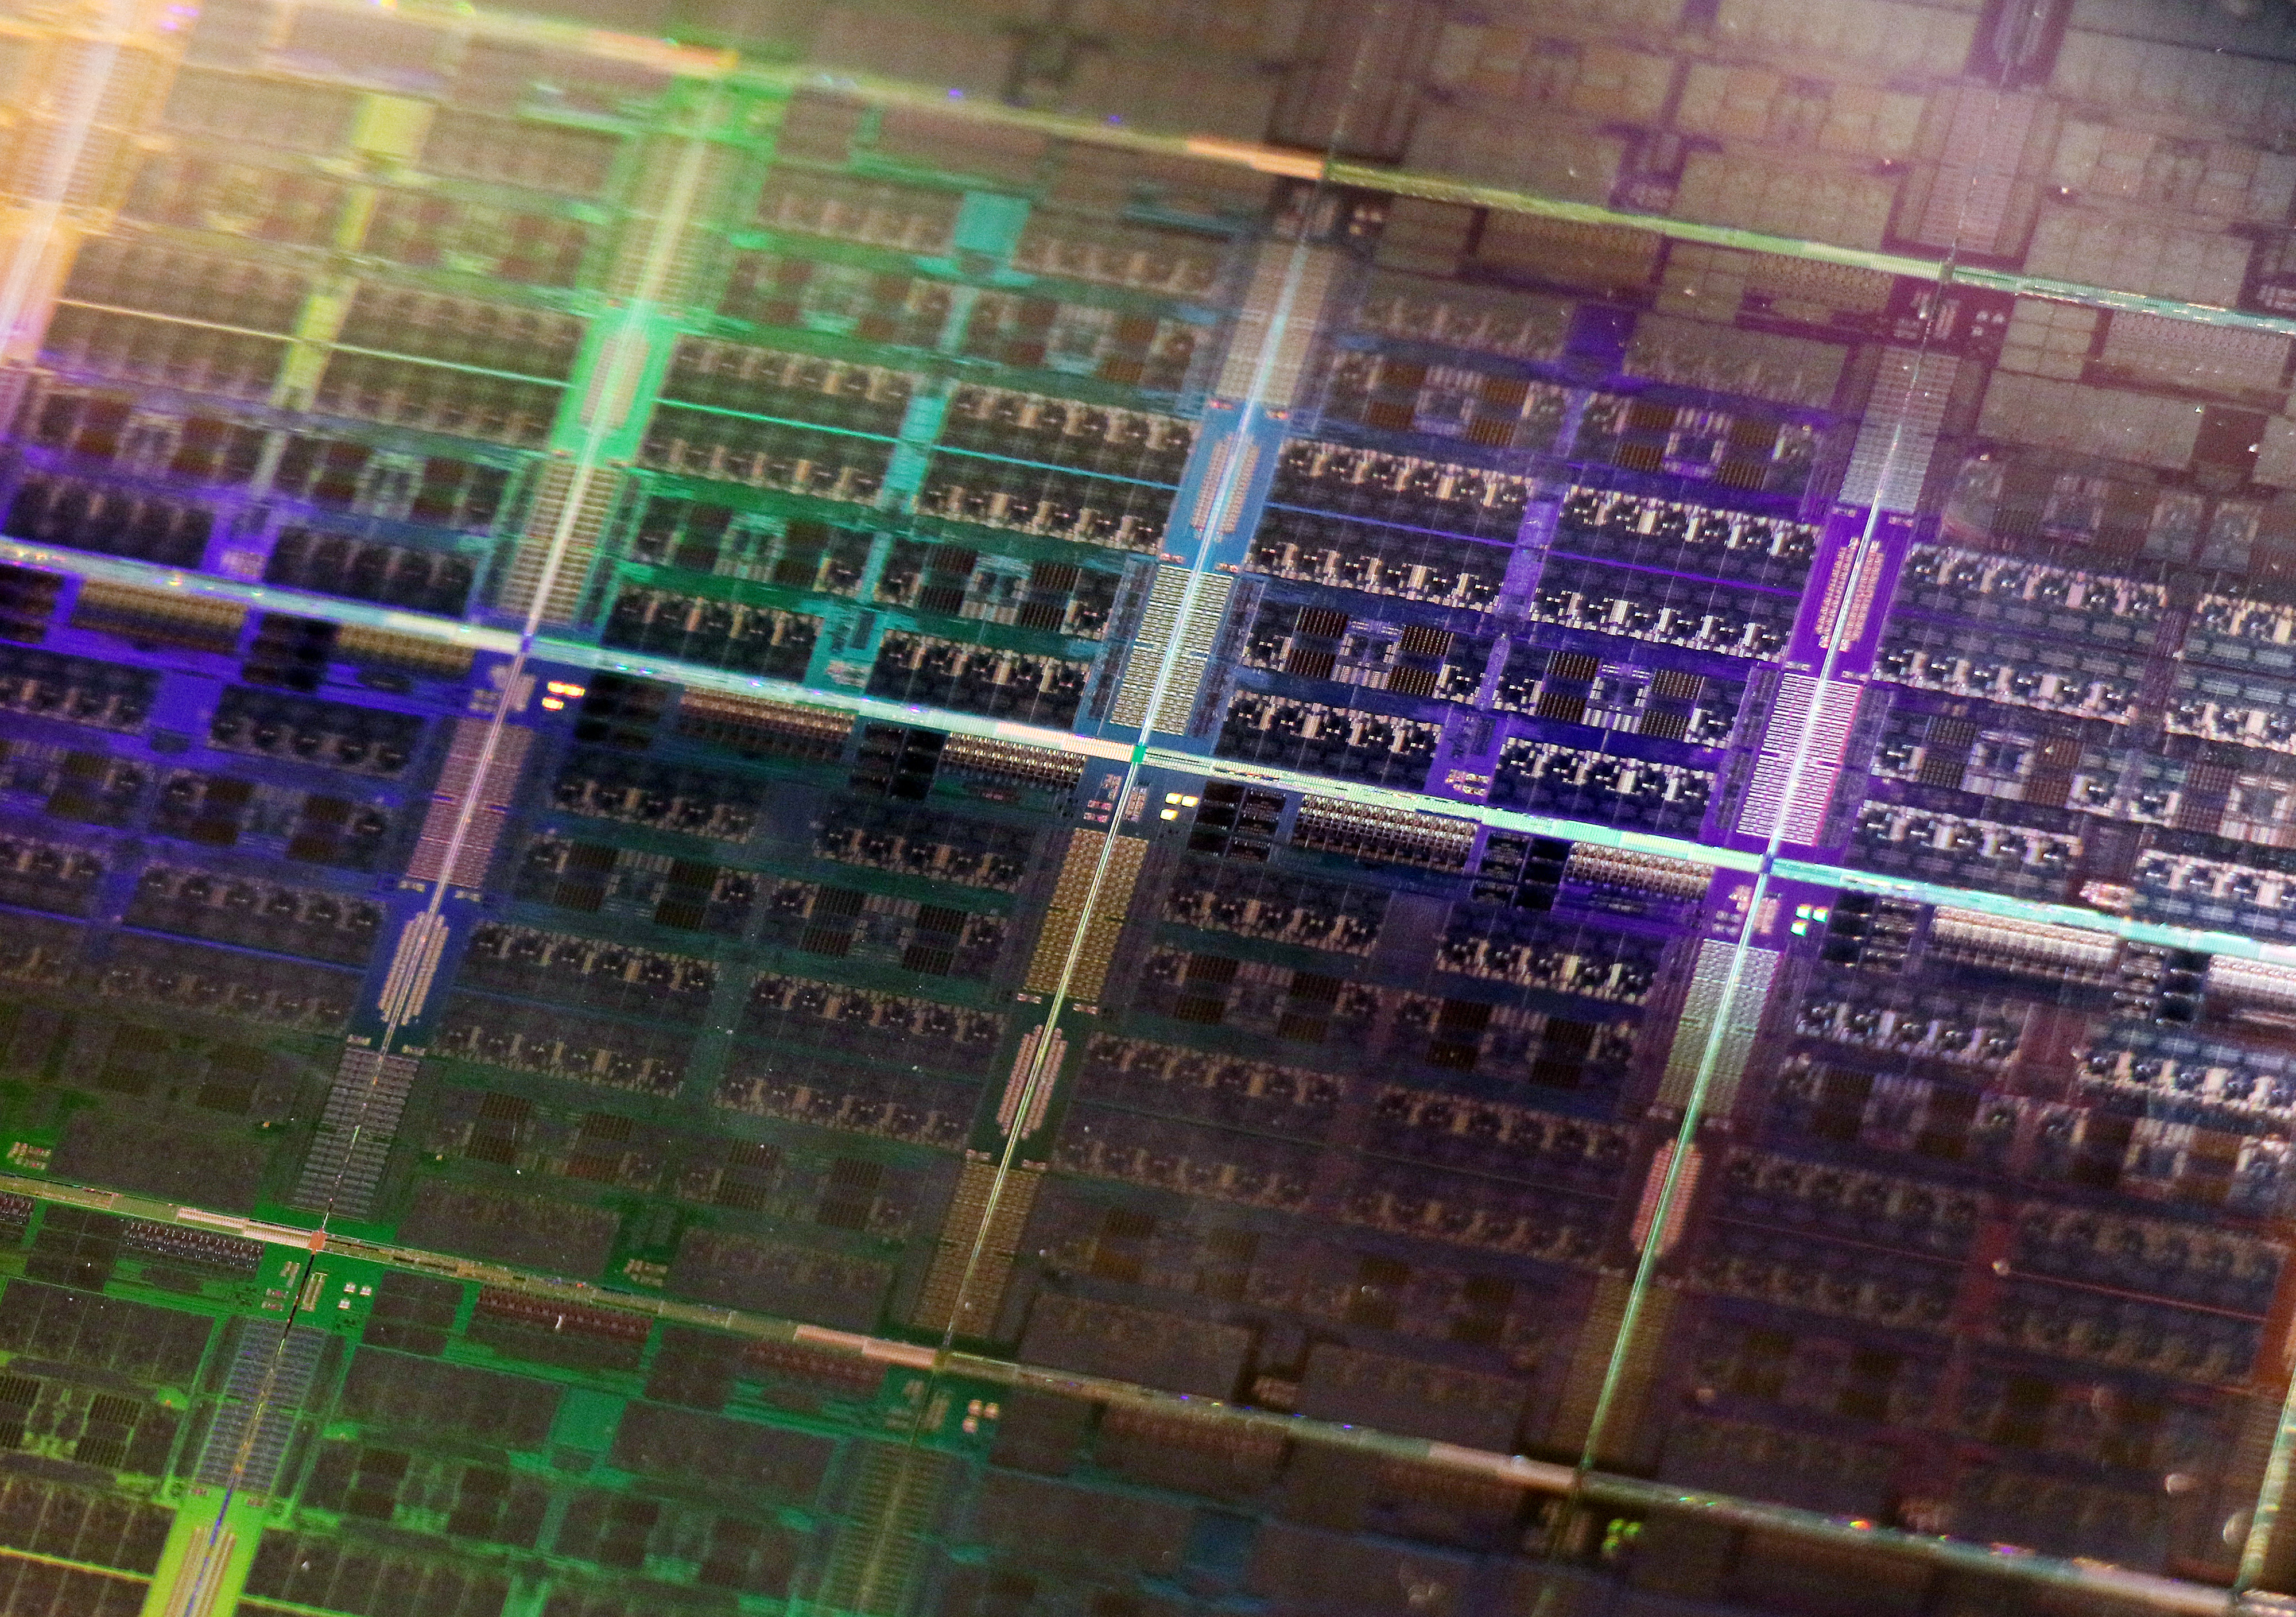 May 14, 2019, Tokyo, Japan - Japan's computer giant Fujitsu unveils a 300mm wafer which has the CPU chips with 48-core and 2-assistant core Arm architecture "A64FX" processor at Fujitsu's high-tech exhibition Fujitsu Forum 2019 in Tokyo on Tuesday, May 14, 2019. Fujitsu and Riken are developing the government-backed next generation supercomputer called Post-K computer, 100 times greater performance of K computer.    (Photo by Yoshio Tsunoda/AFLO) No Use China. No Use Taiwan. No Use Korea. No Use Japan.